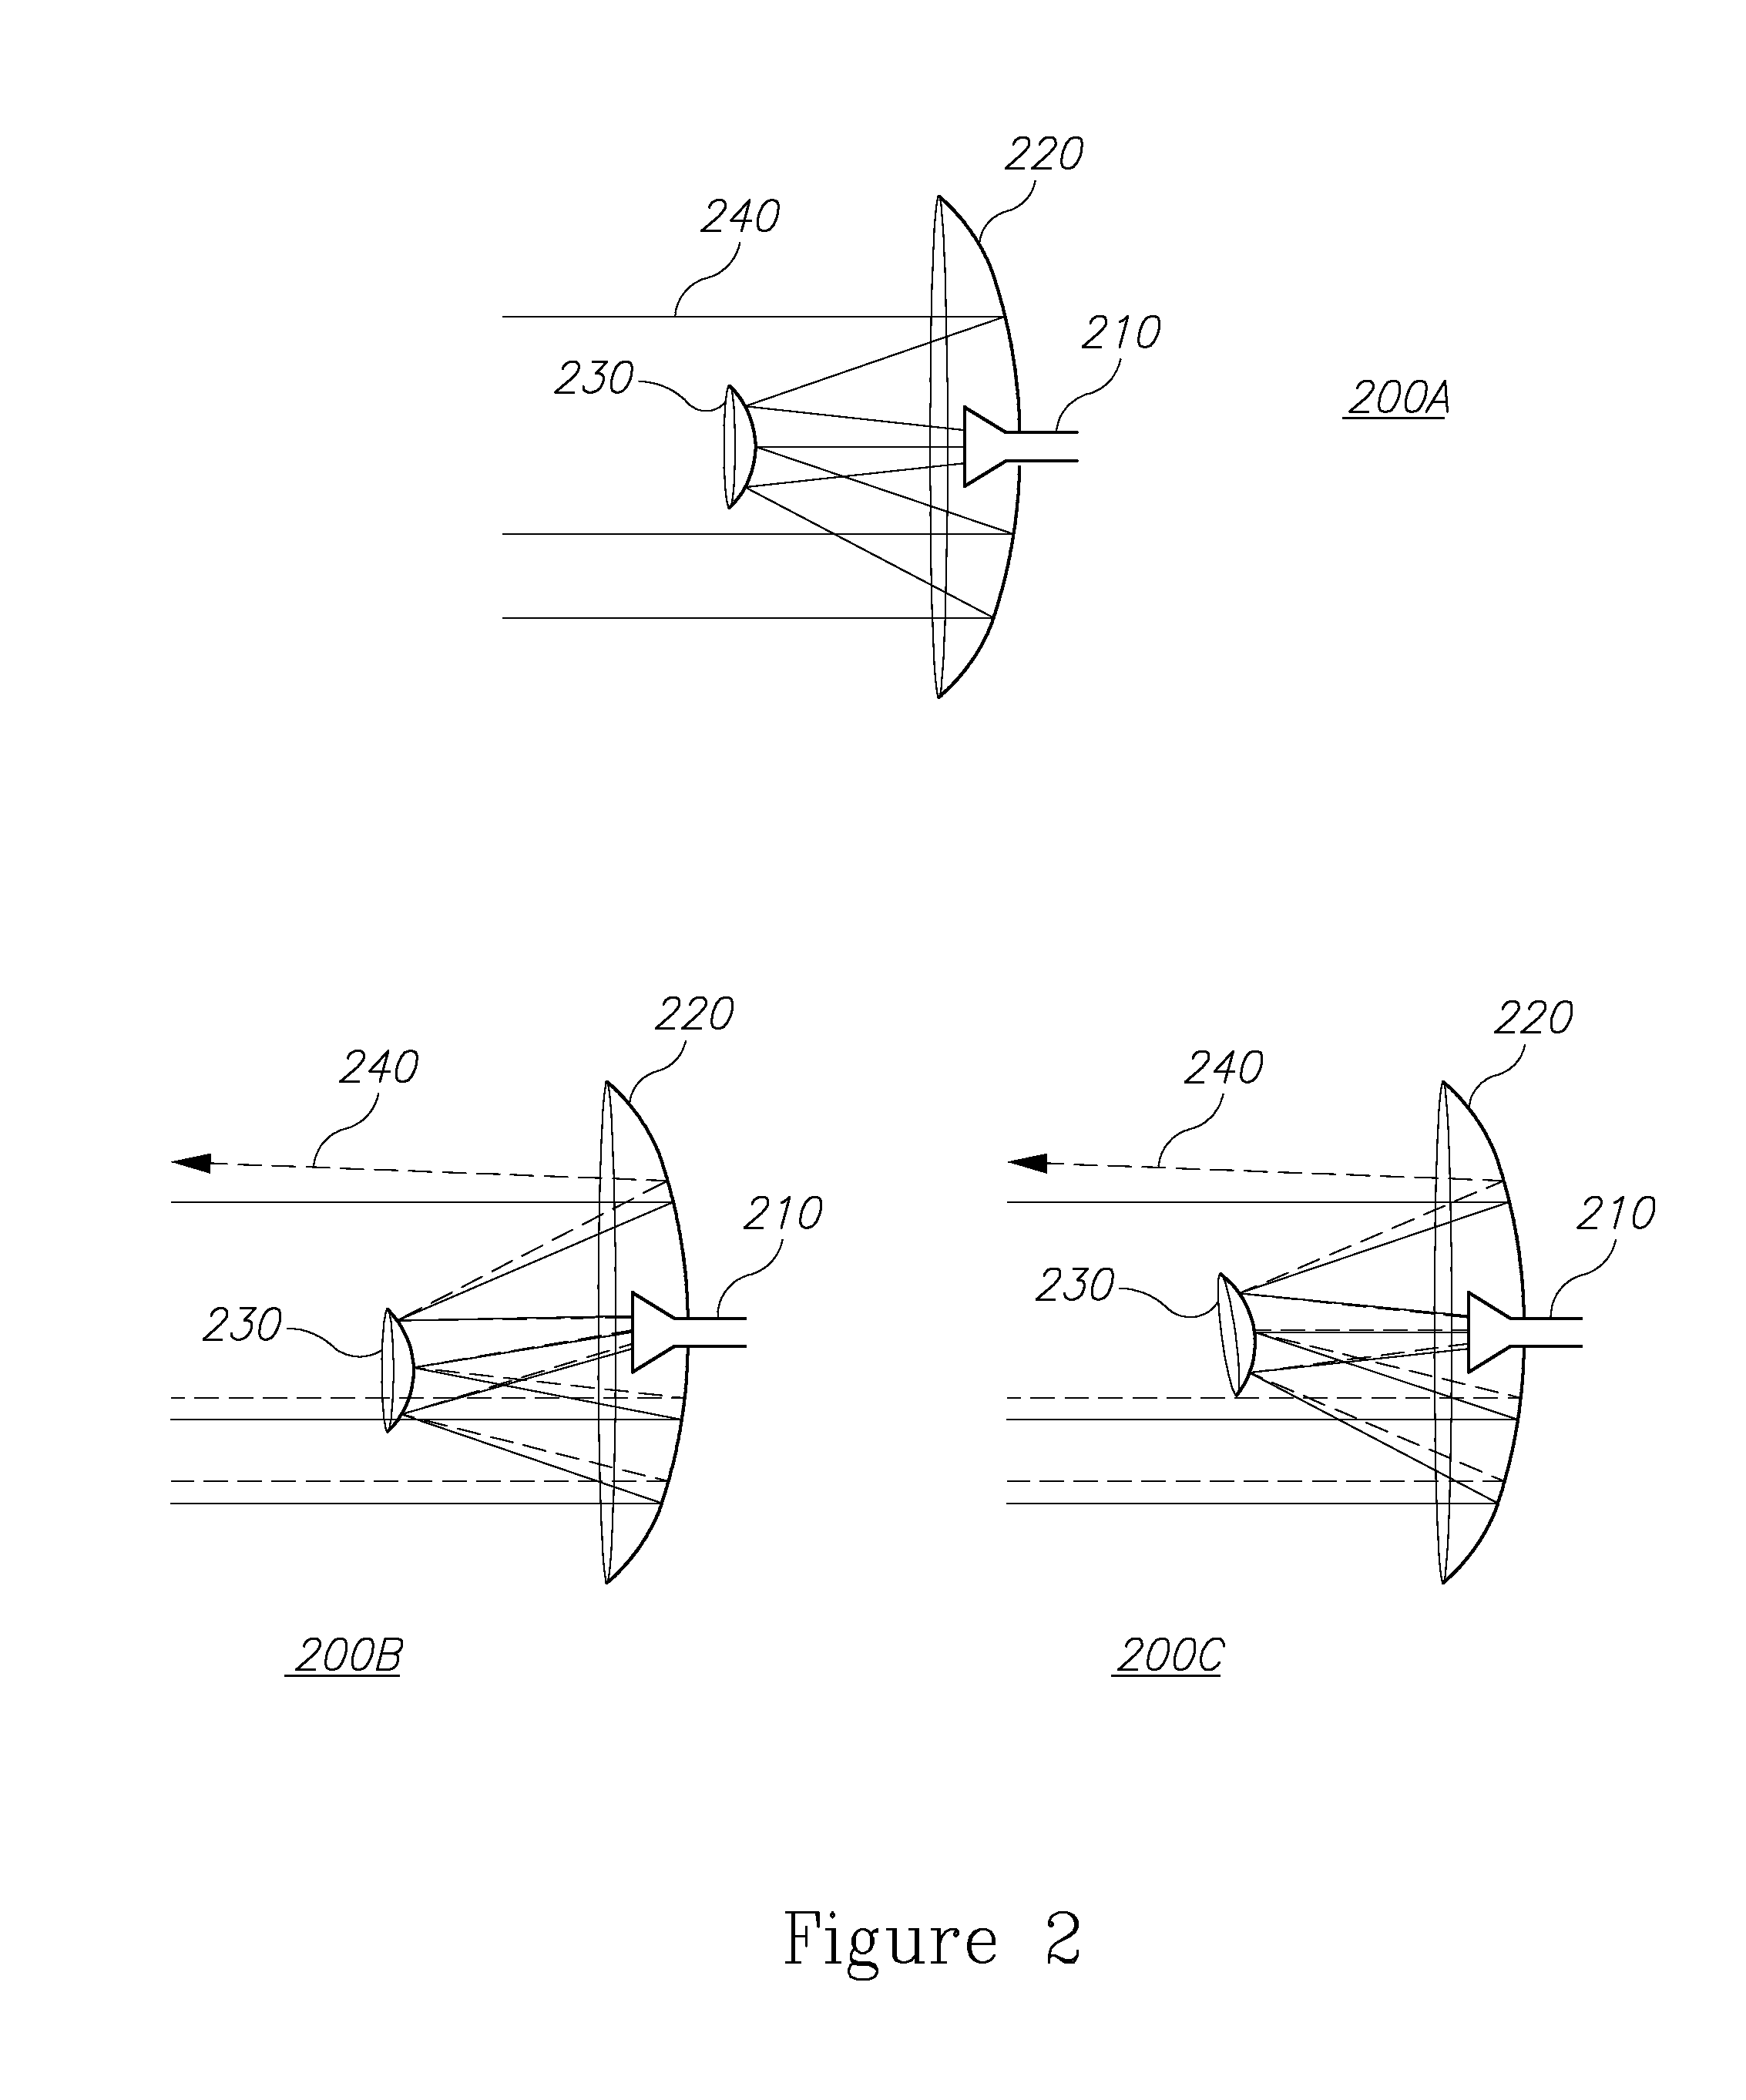 Large aperture antenna with narrow angle fast beam steering